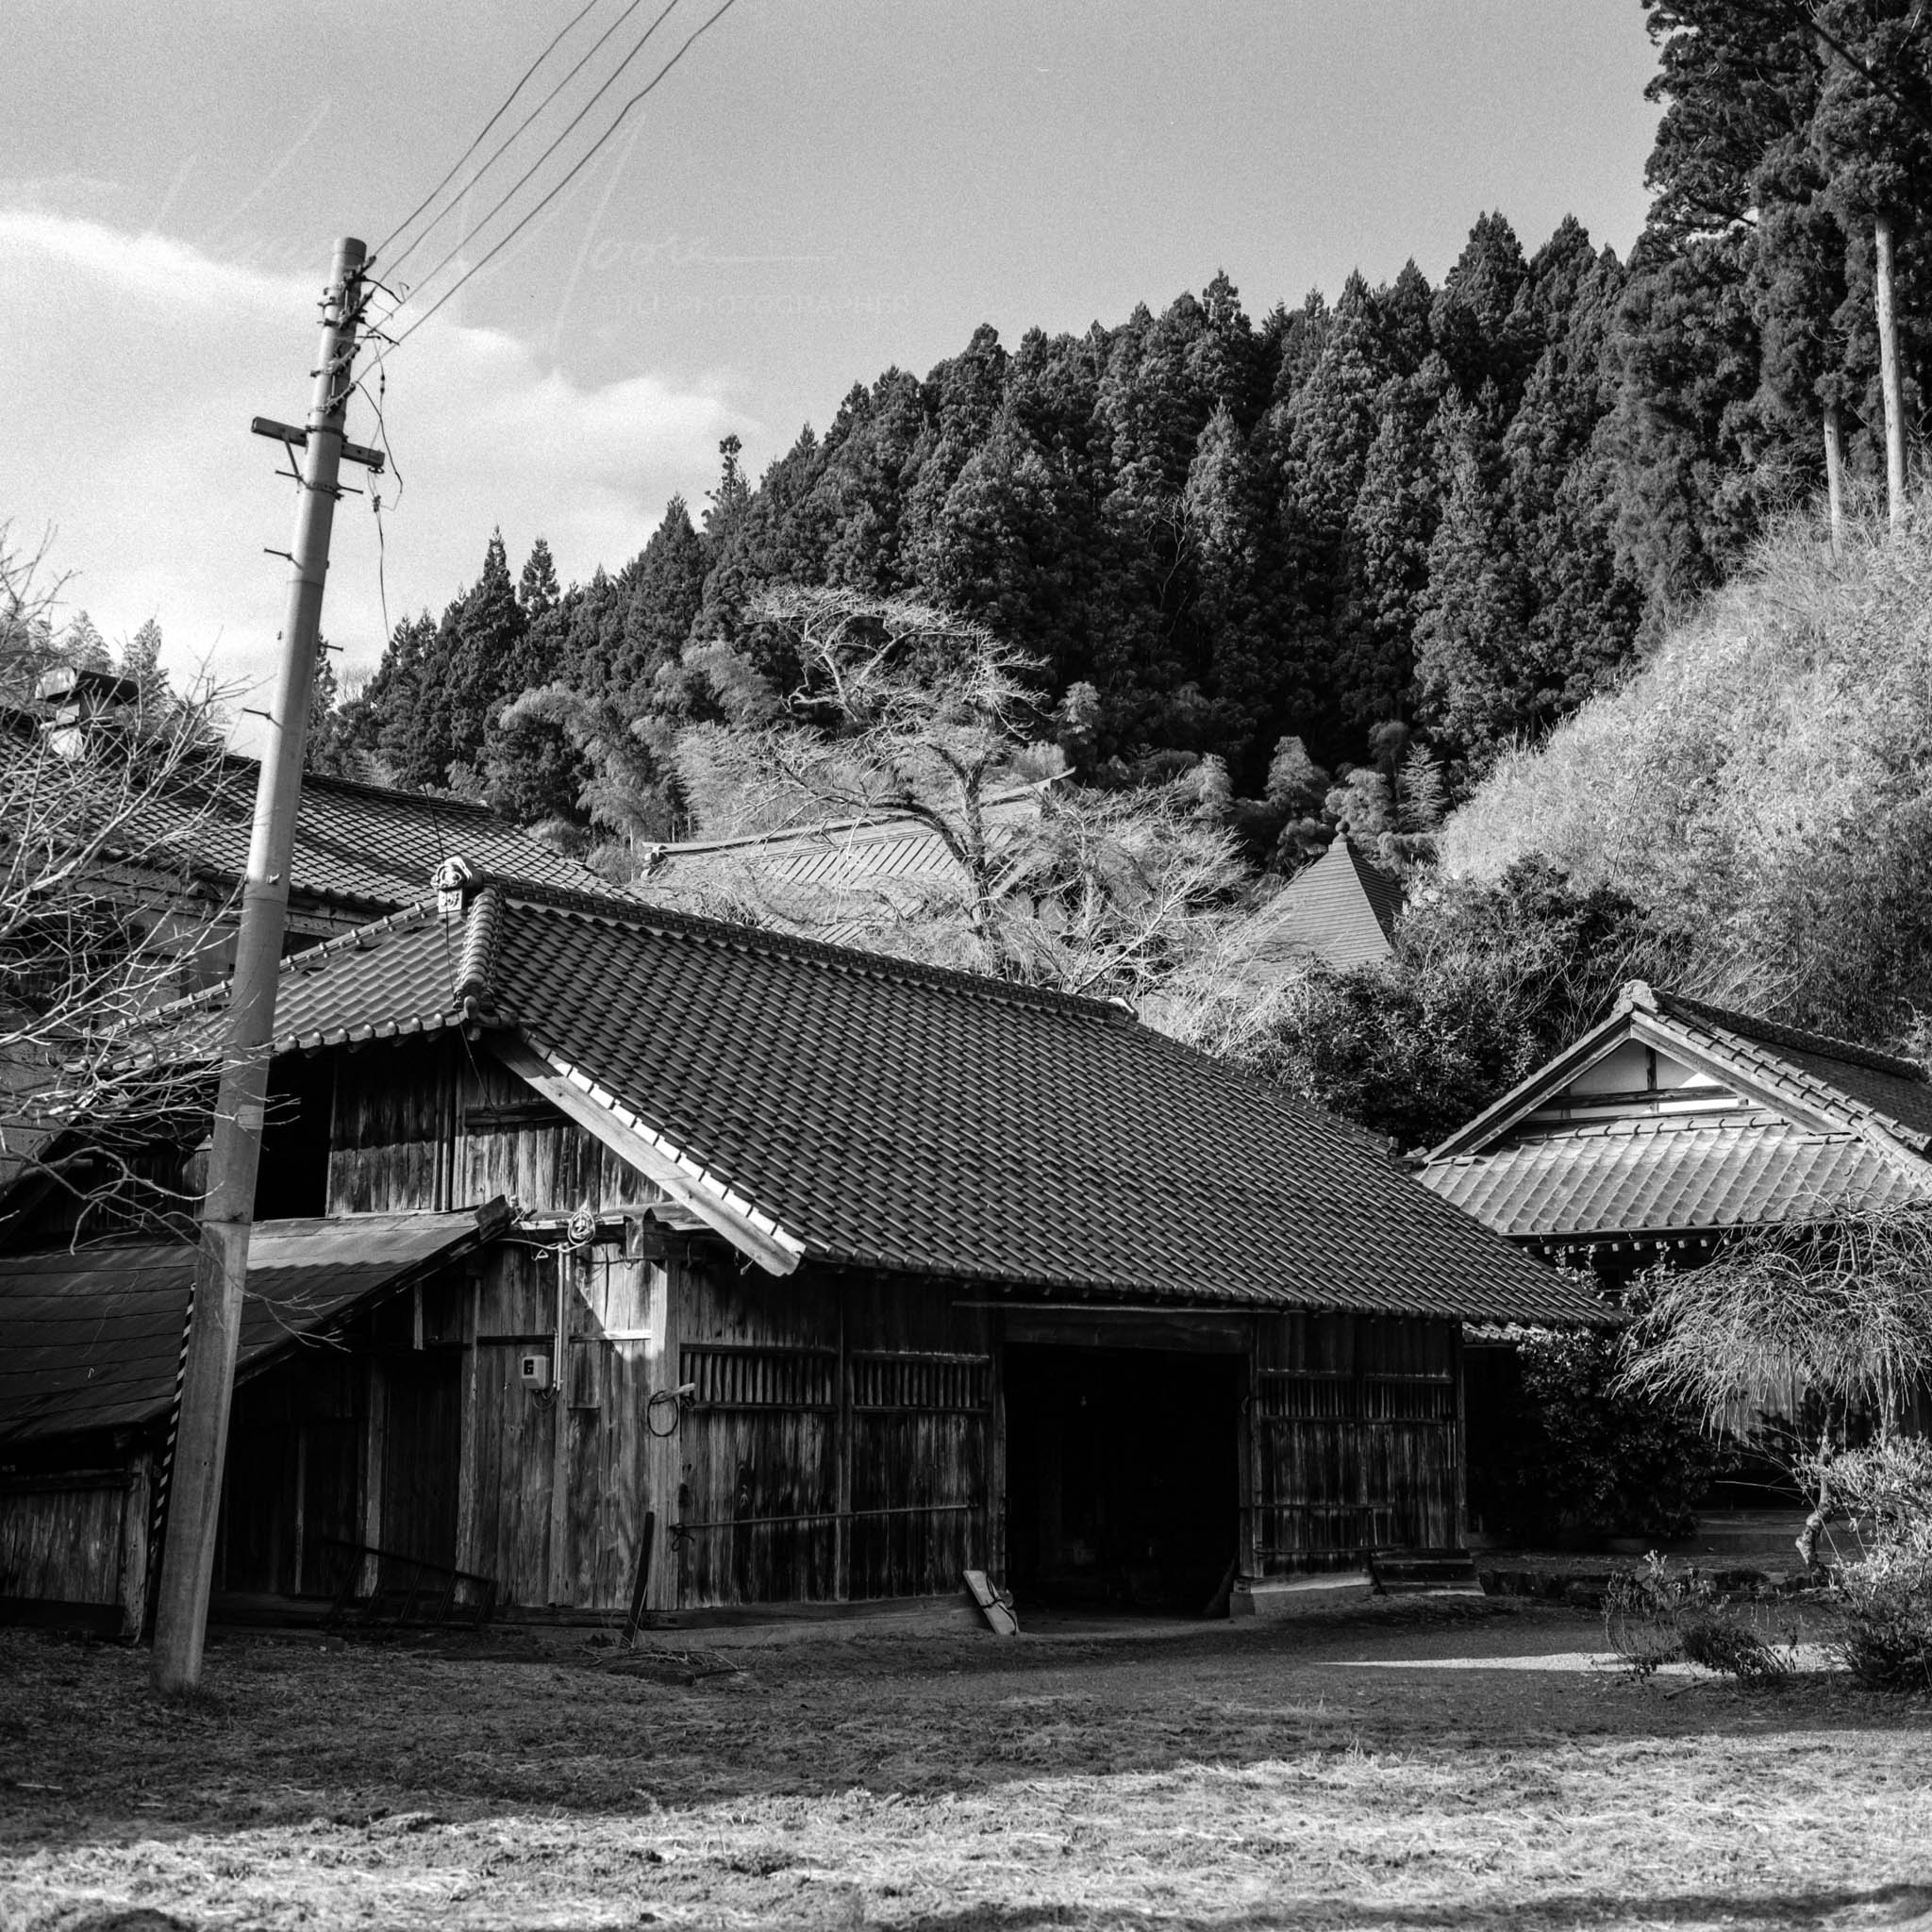 Monochrome image of traditional rural Japanese buildings amidst serene, densely wooded landscape.